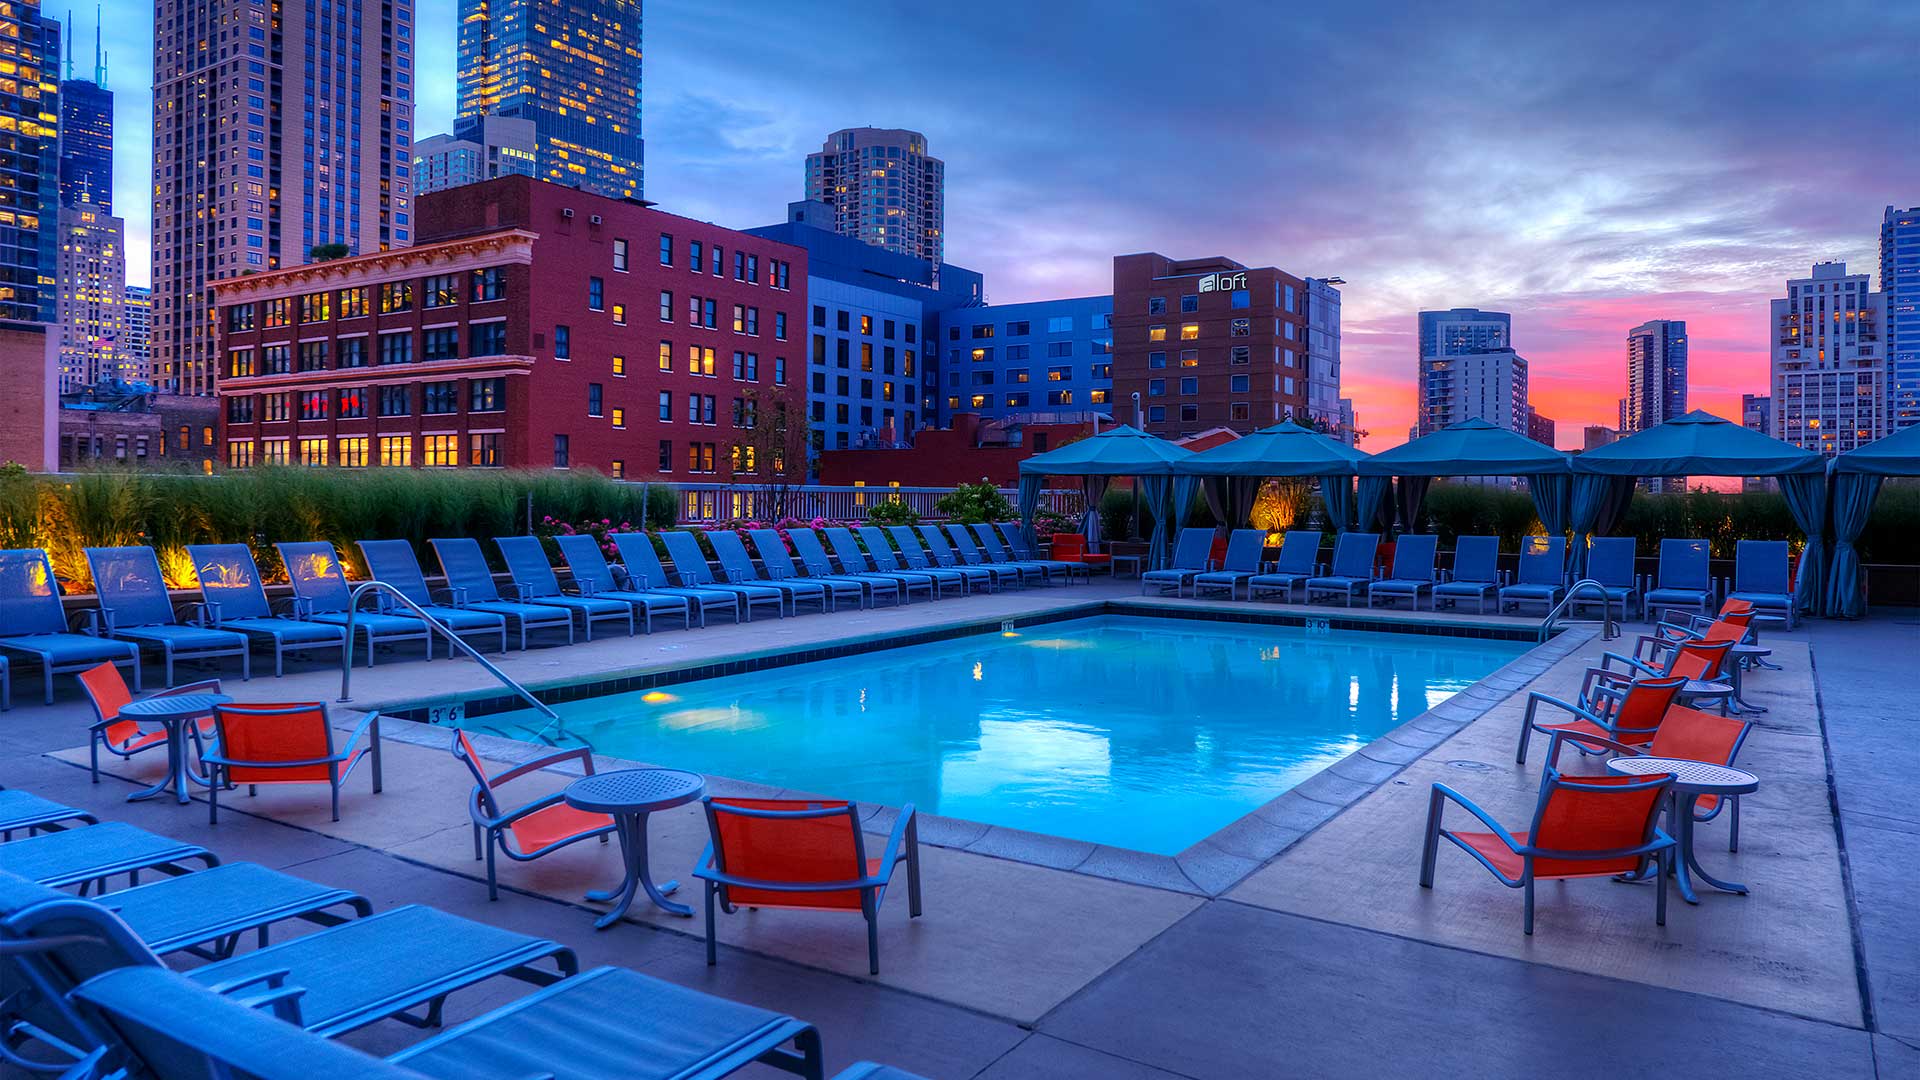 An outdoor pool at dusk. Lounge chairs surround the pool on all four sides. City buildings are seen in the background with lights on.